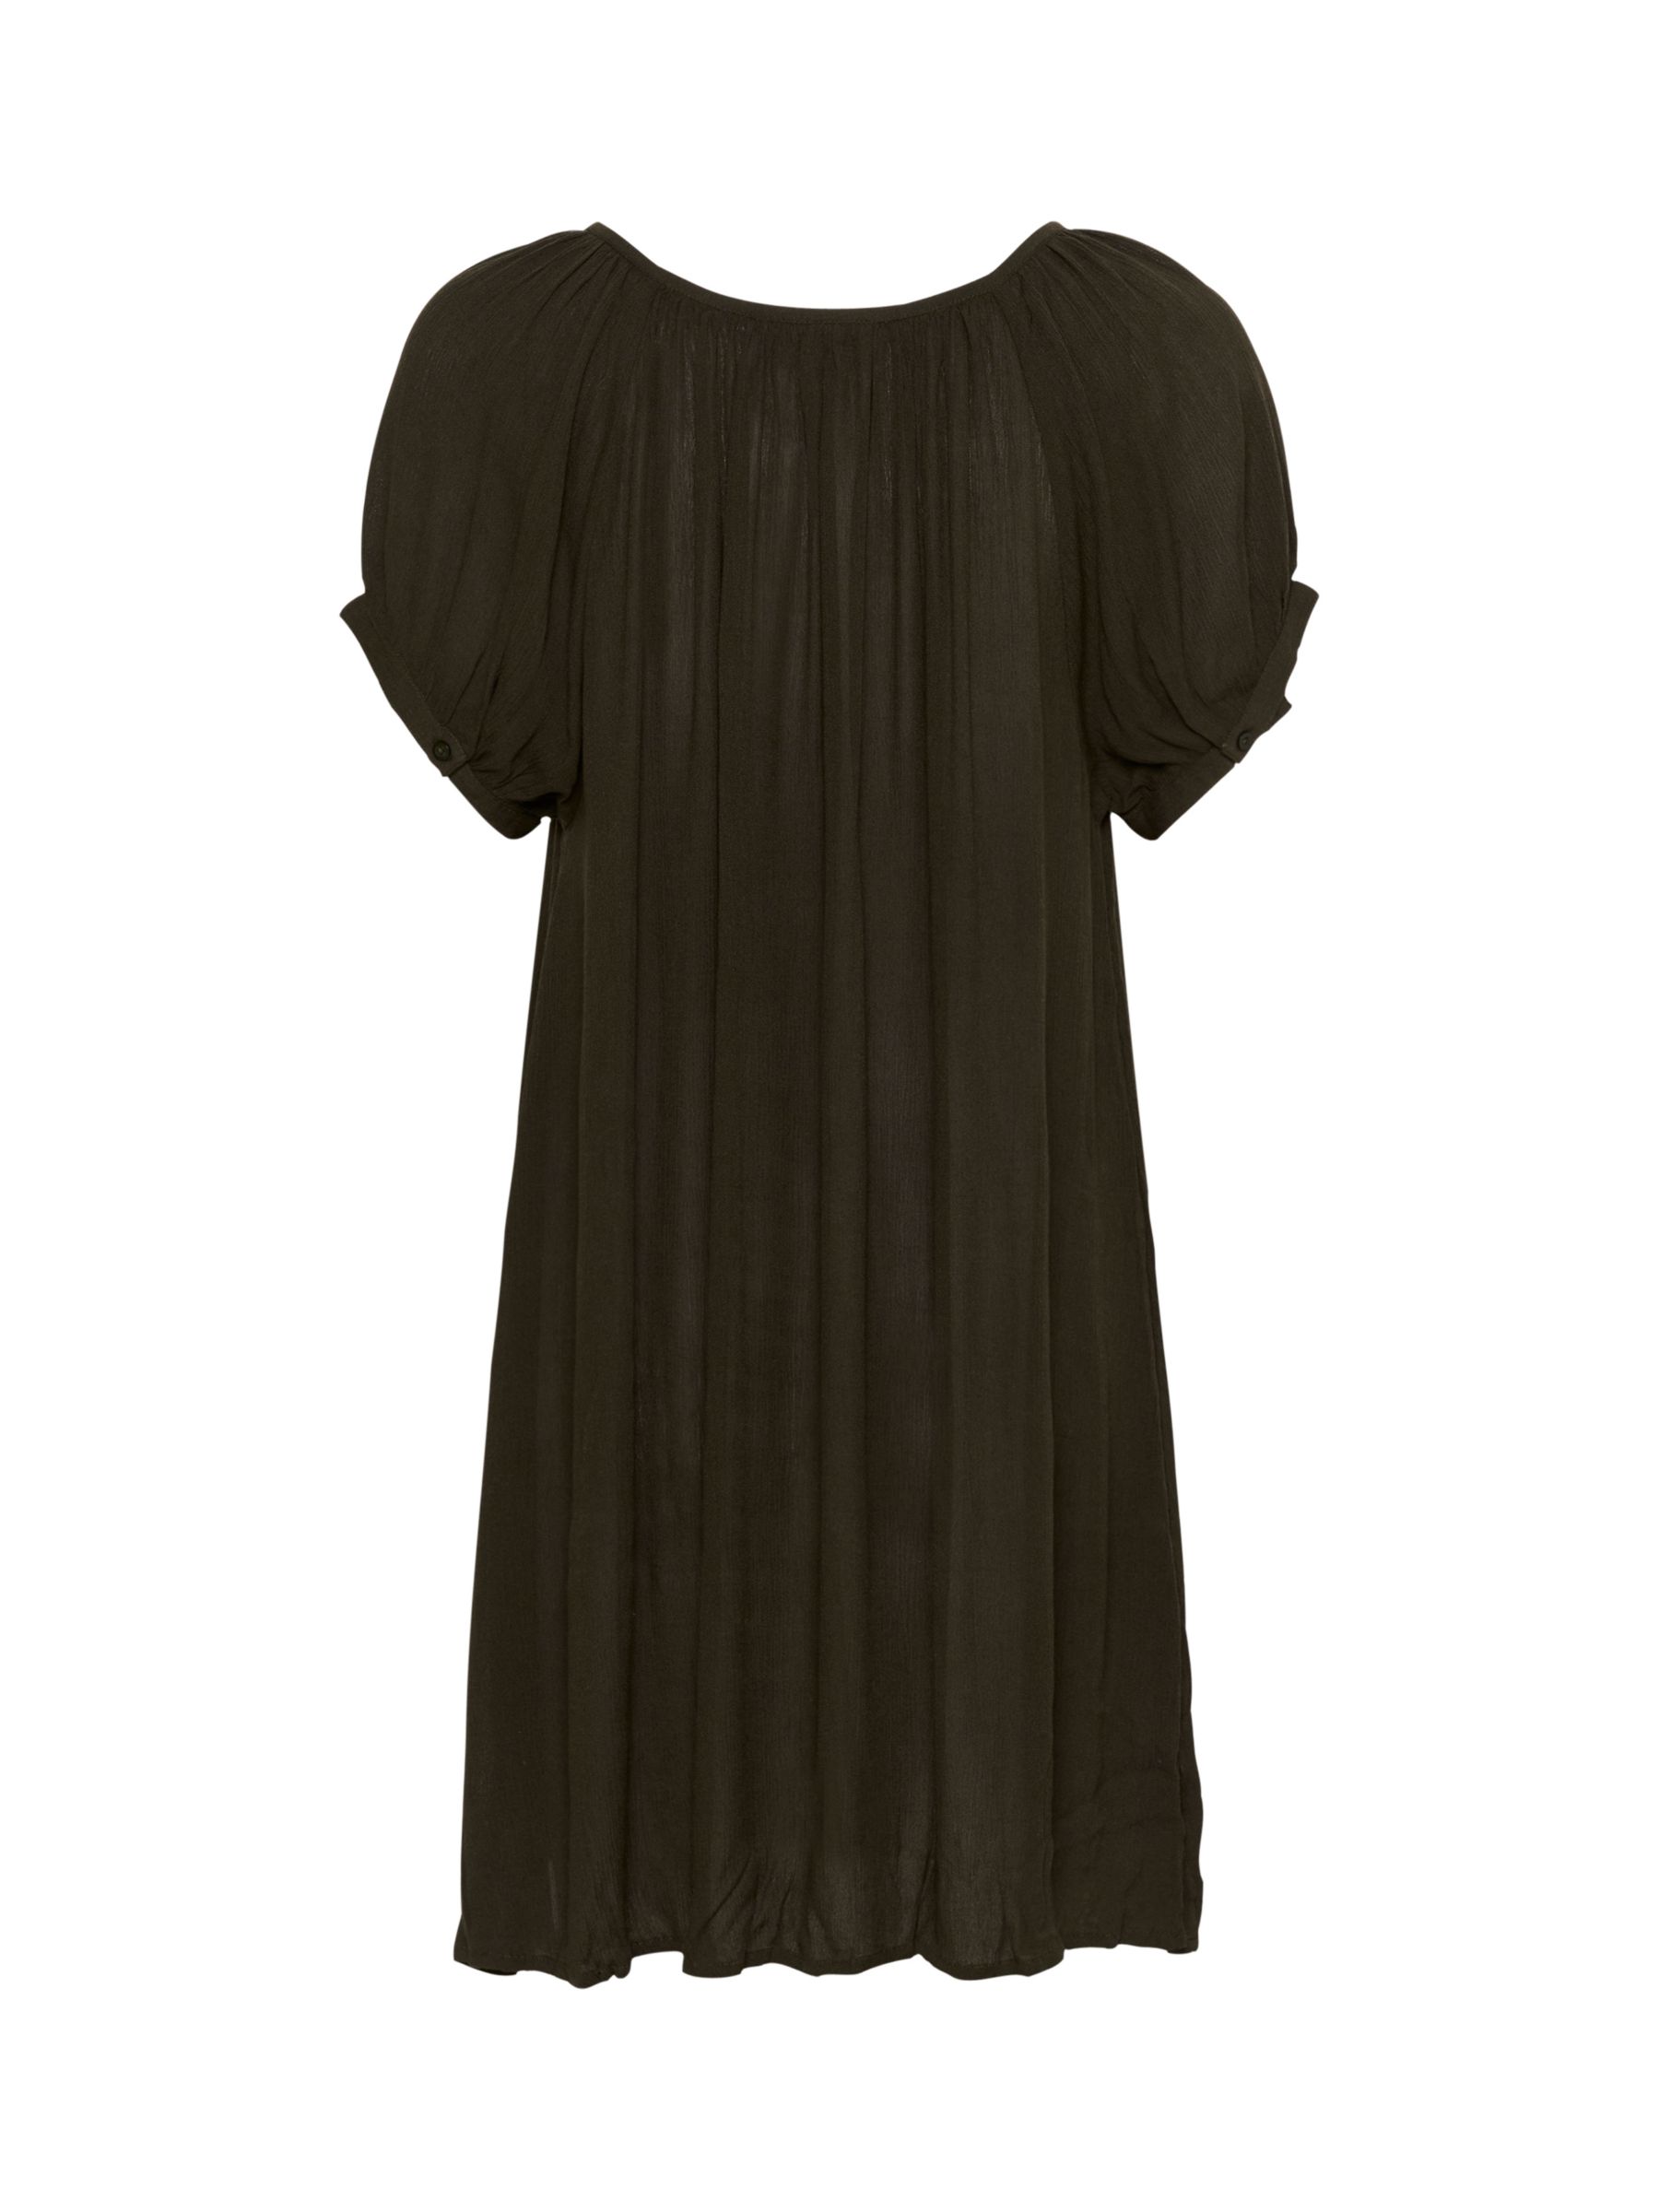 Buy KAFFE Amber Ecovero Short Sleeve Tunic, Forest Night Online at johnlewis.com